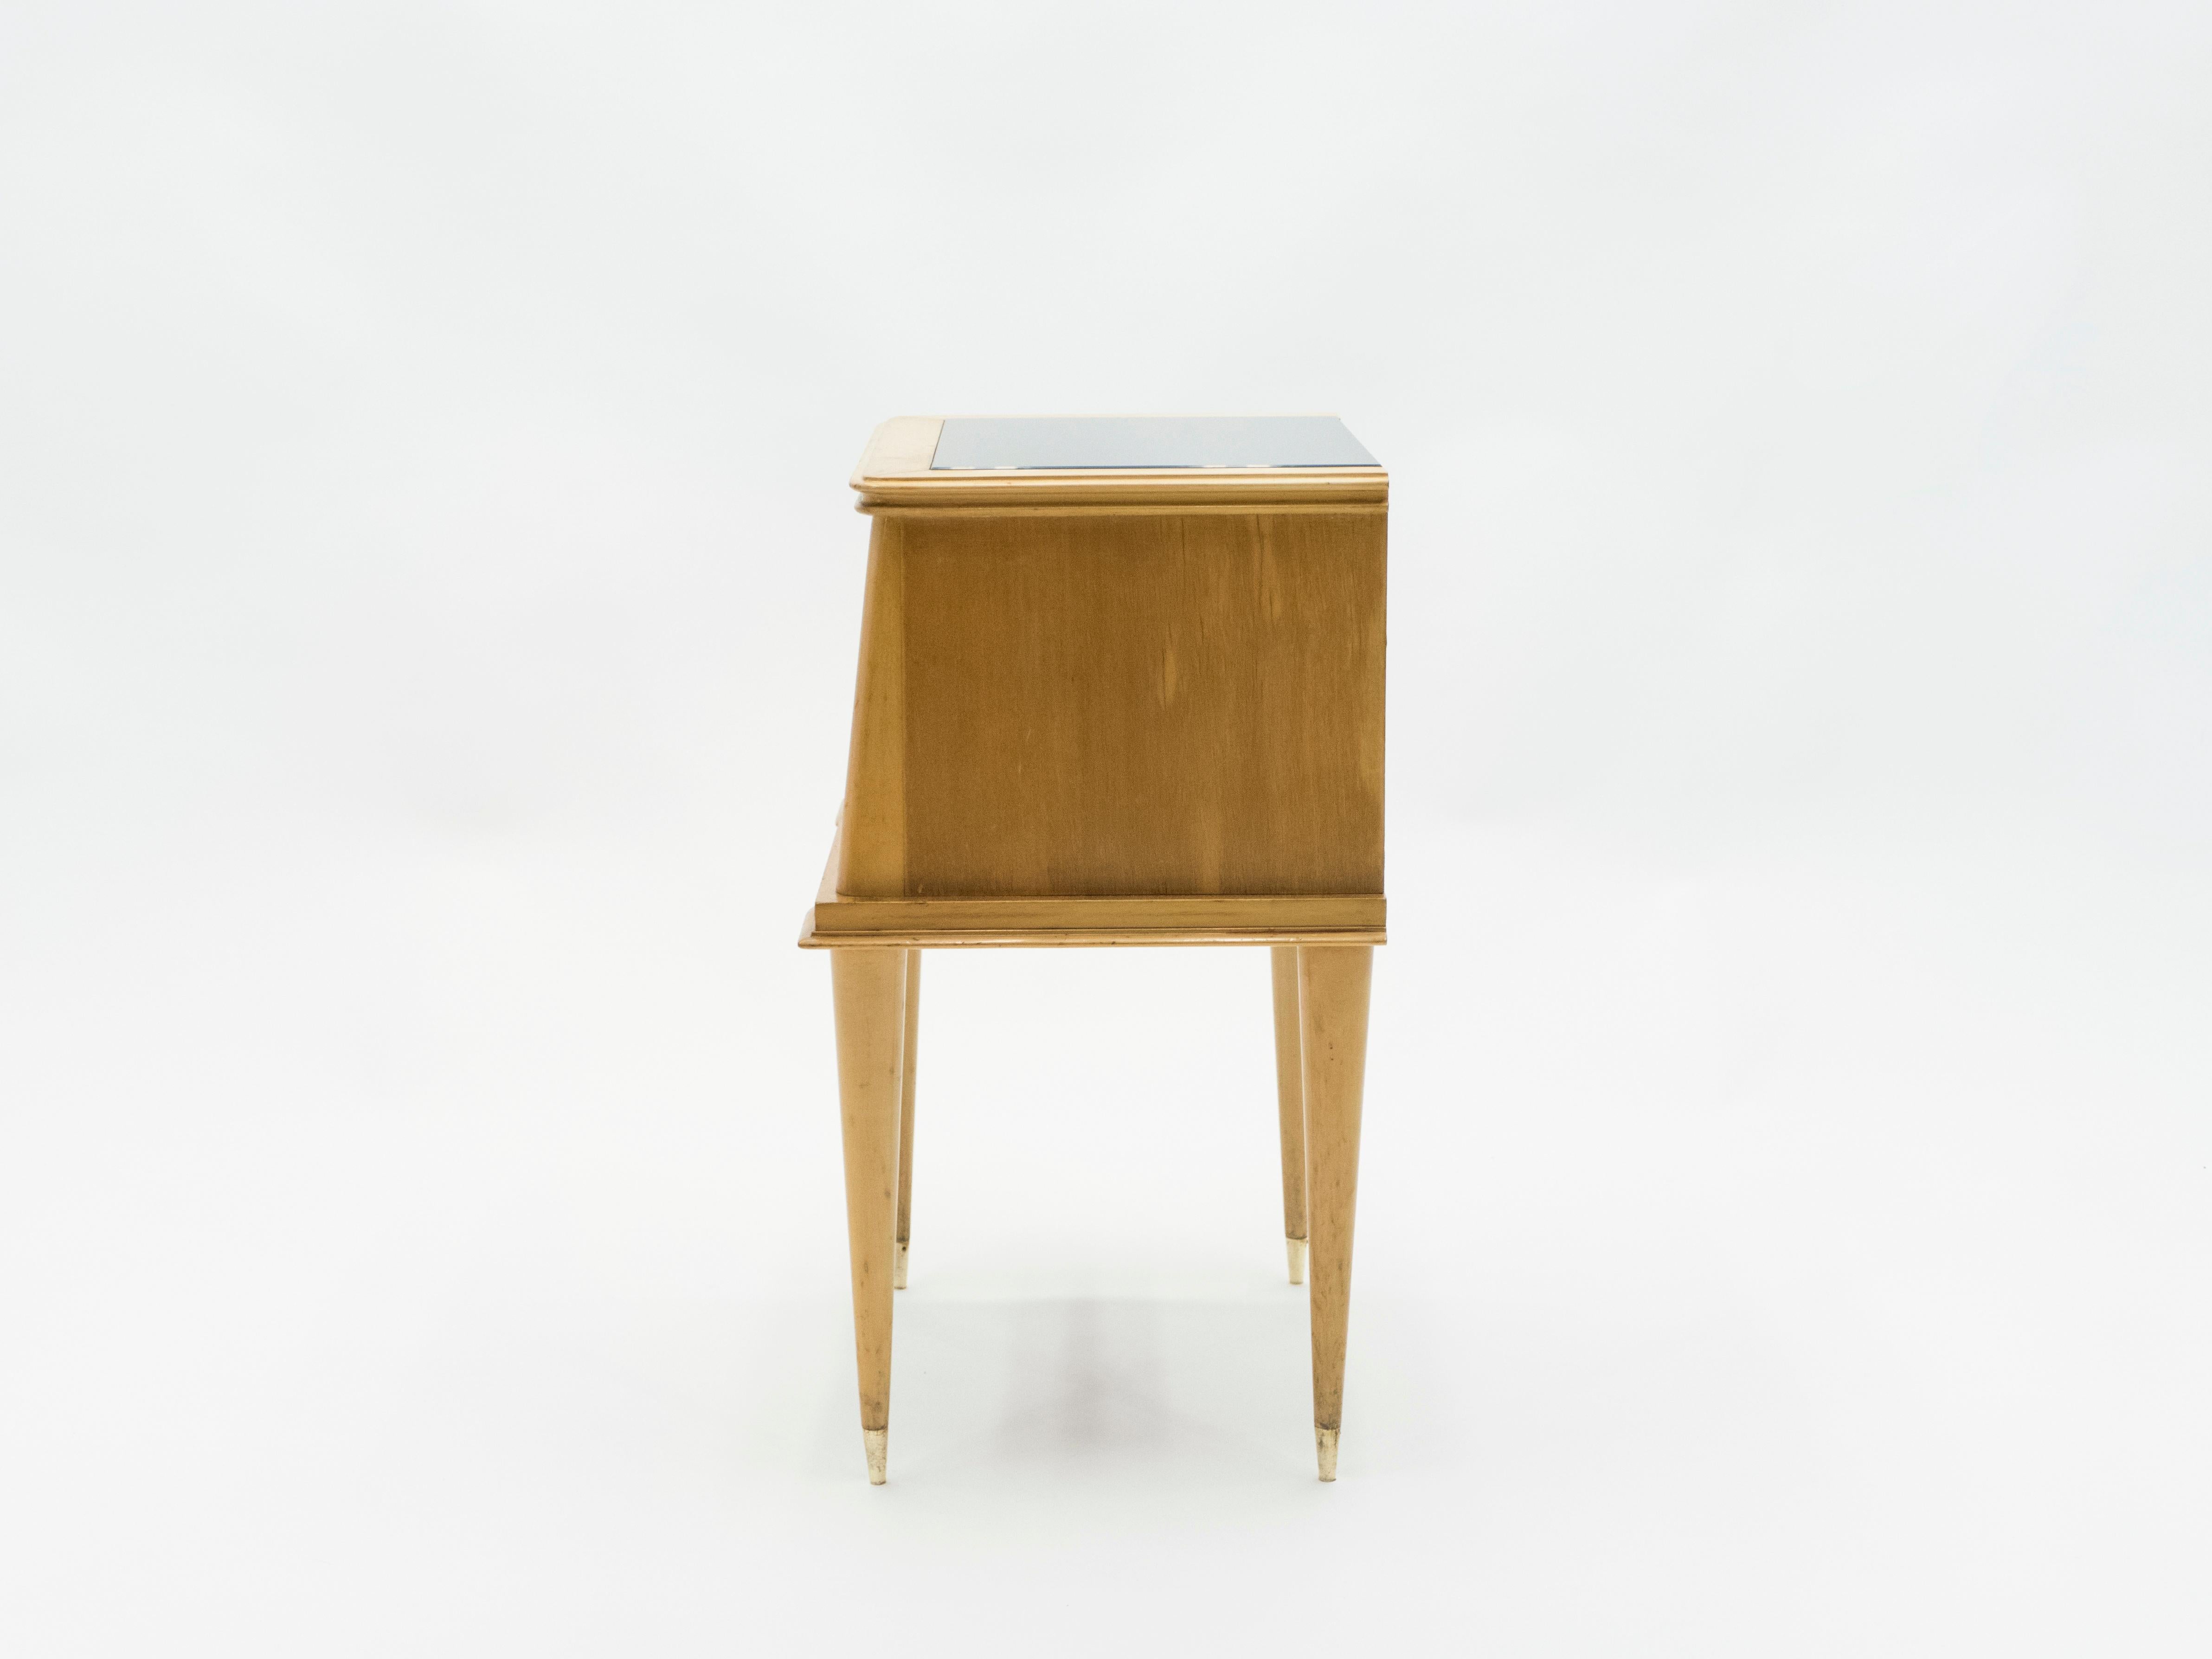 French Sycamore Nightstands 2 Drawers Attributed to Suzanne Guiguichon, 1950s For Sale 4